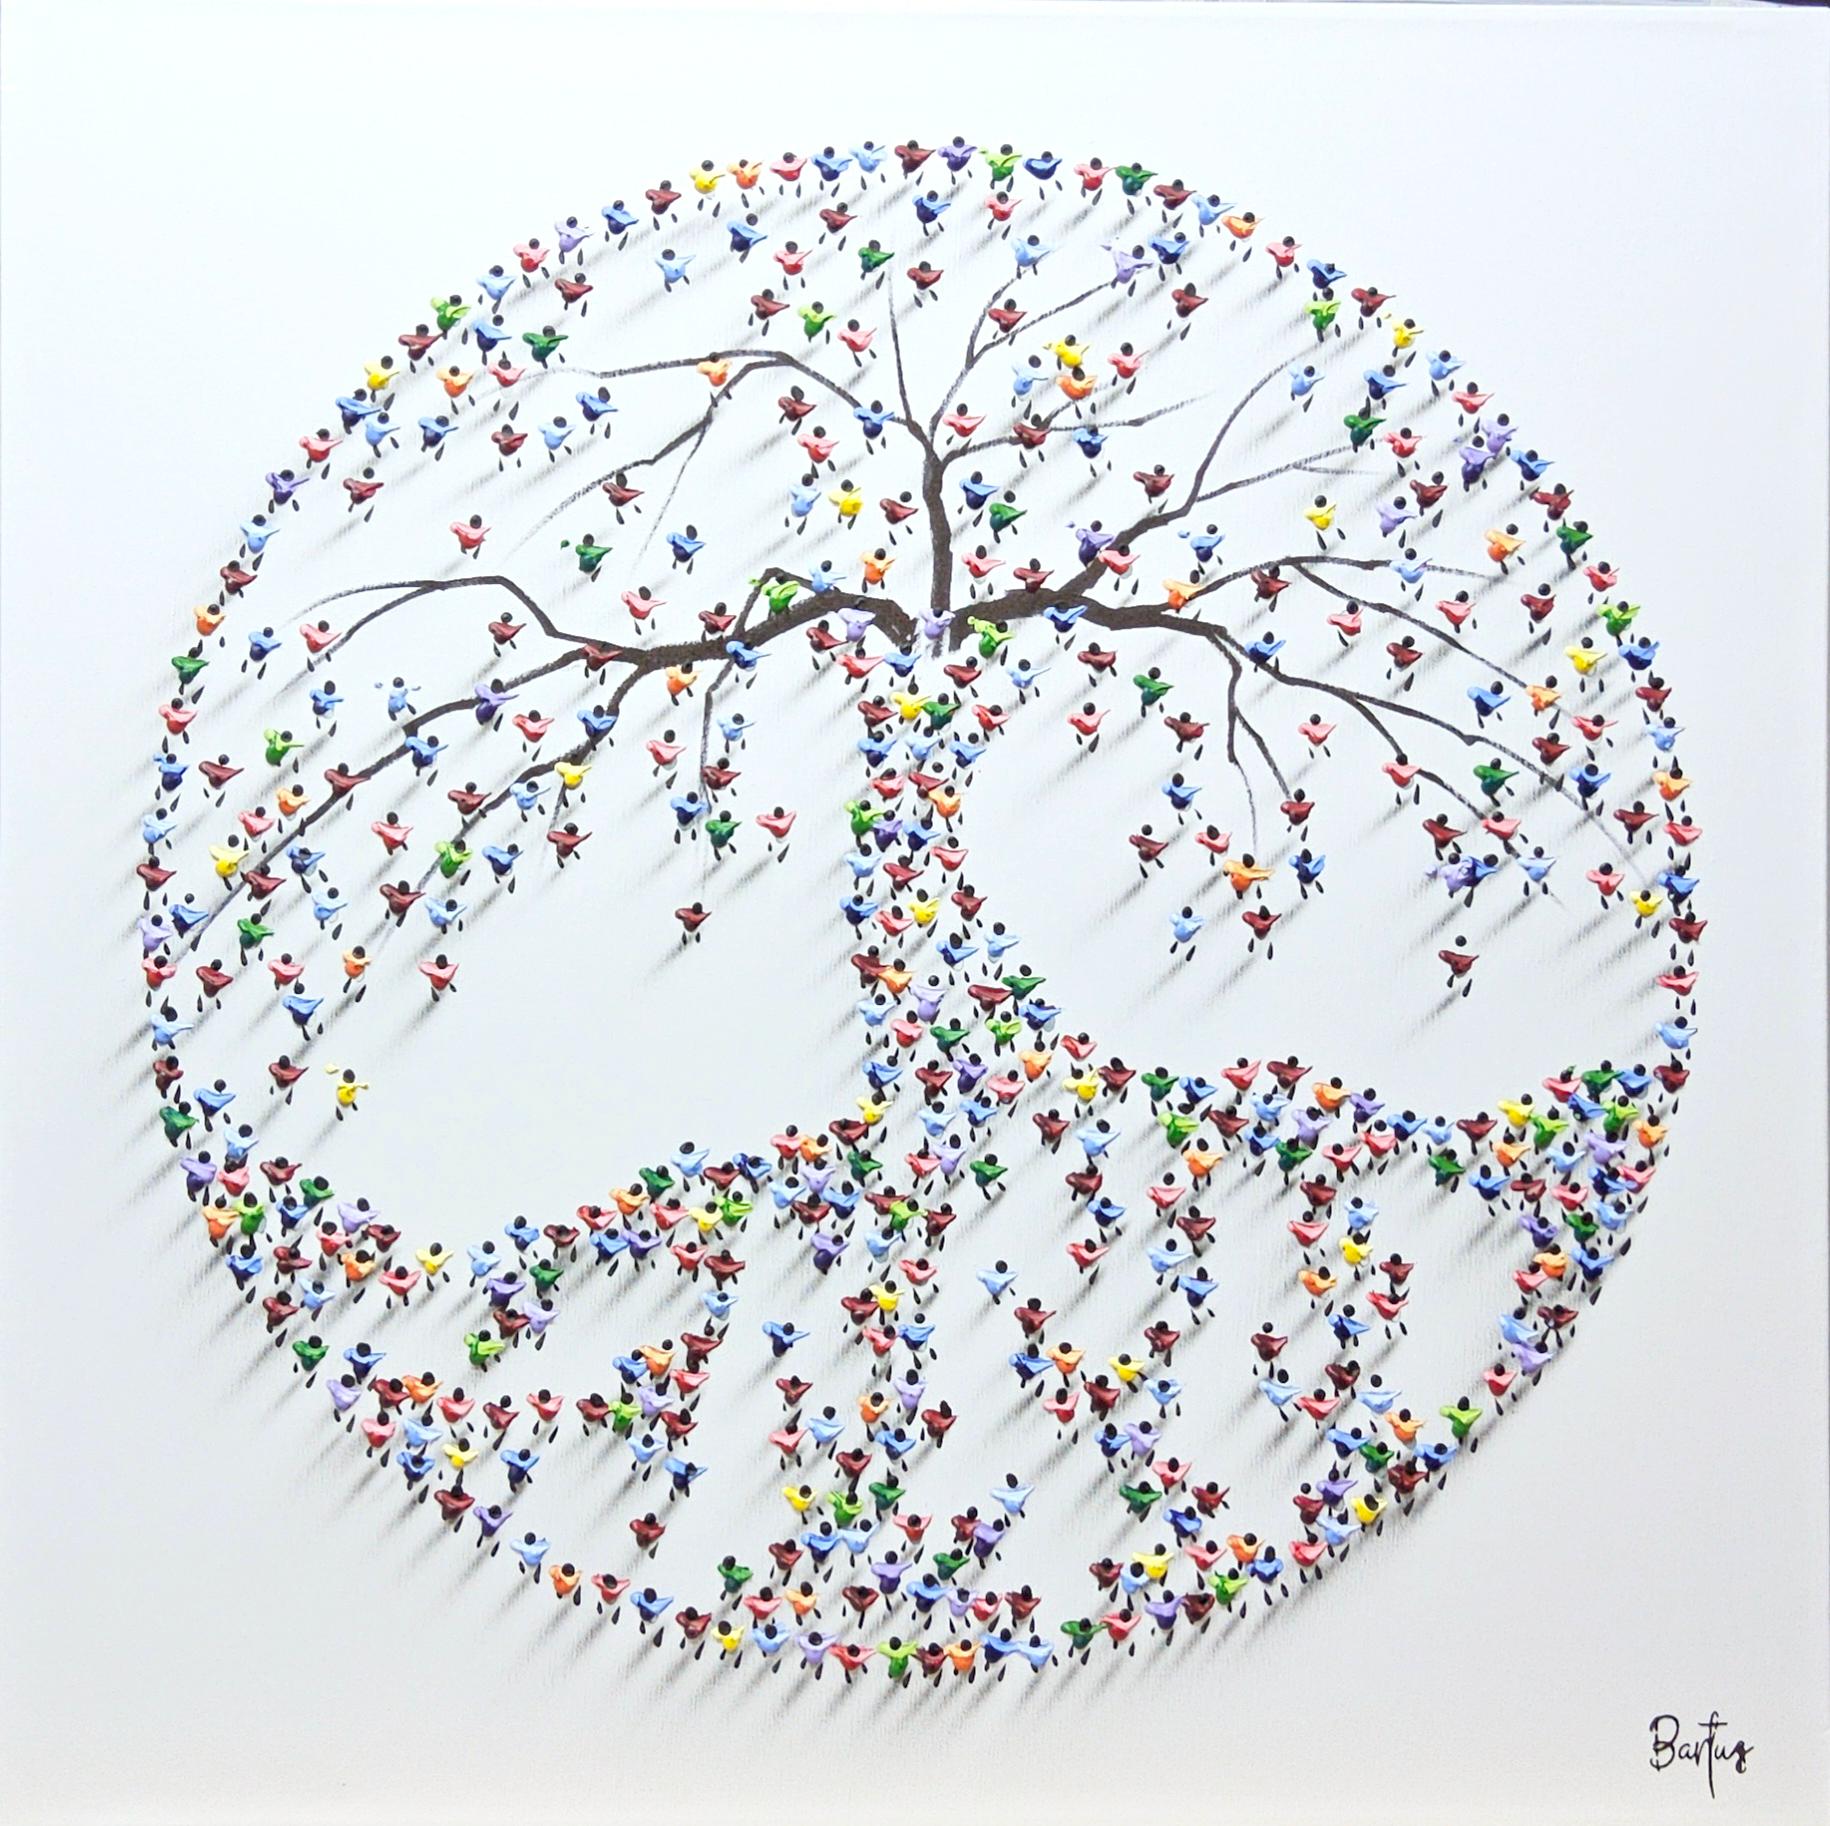 This piece, "We Grow Stronger Together", is a 32x32 mixed media painting on canvas by artist Francisco Bartus. Featured is a tree of life symbol, made up of individual helpings of paint, strategically placed and formed to create the impression of